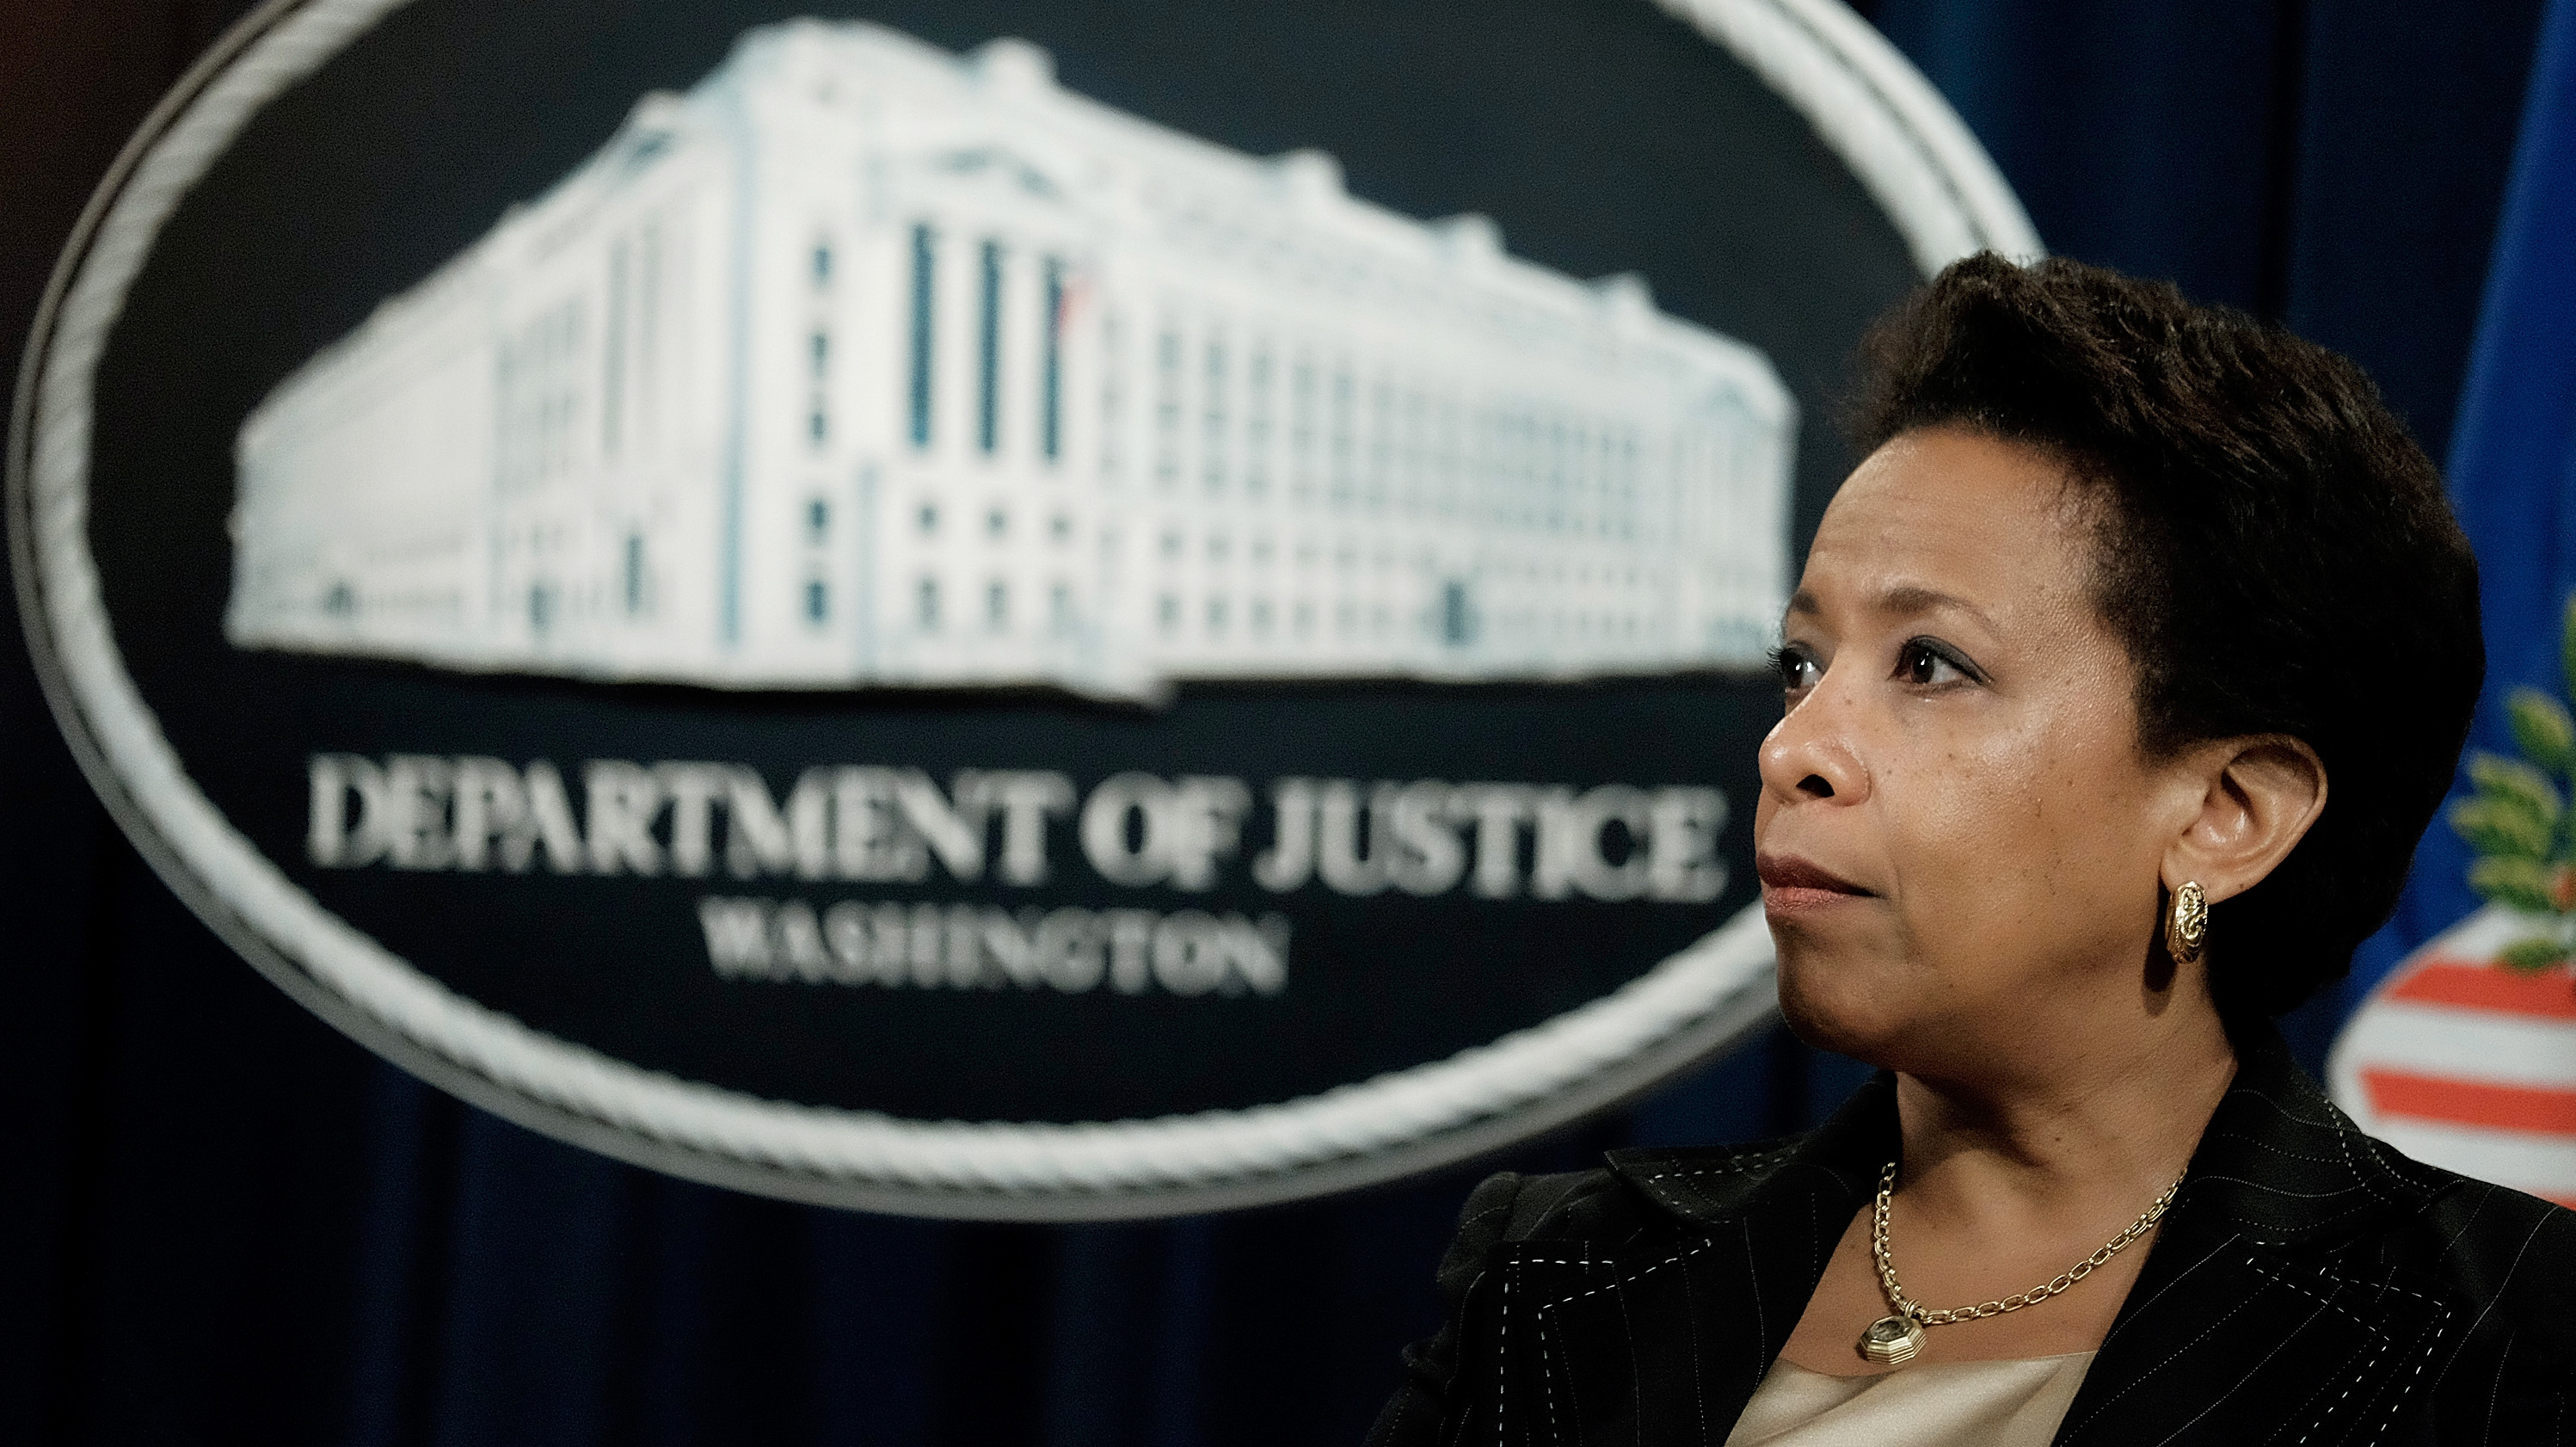 "I think that if anyone is living in a place where they don't feel safe, they're going to have tension, whether that's a community member or a member of law enforcement," Attorney General Loretta Lynch told NPR. T.J. Kirkpatrick/Getty Images